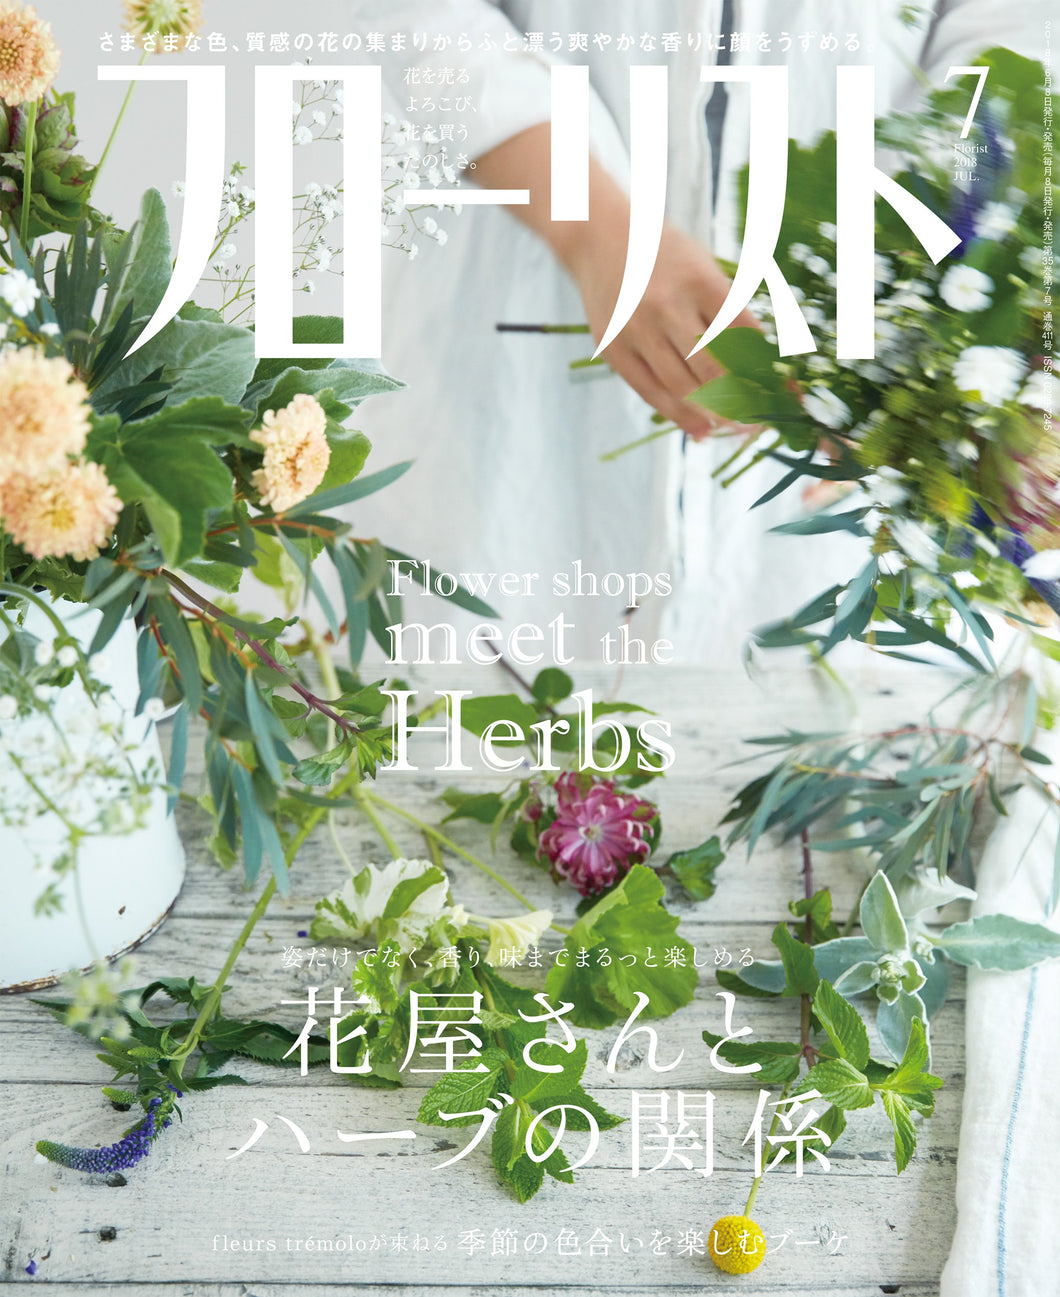 Florist July 2018 issue